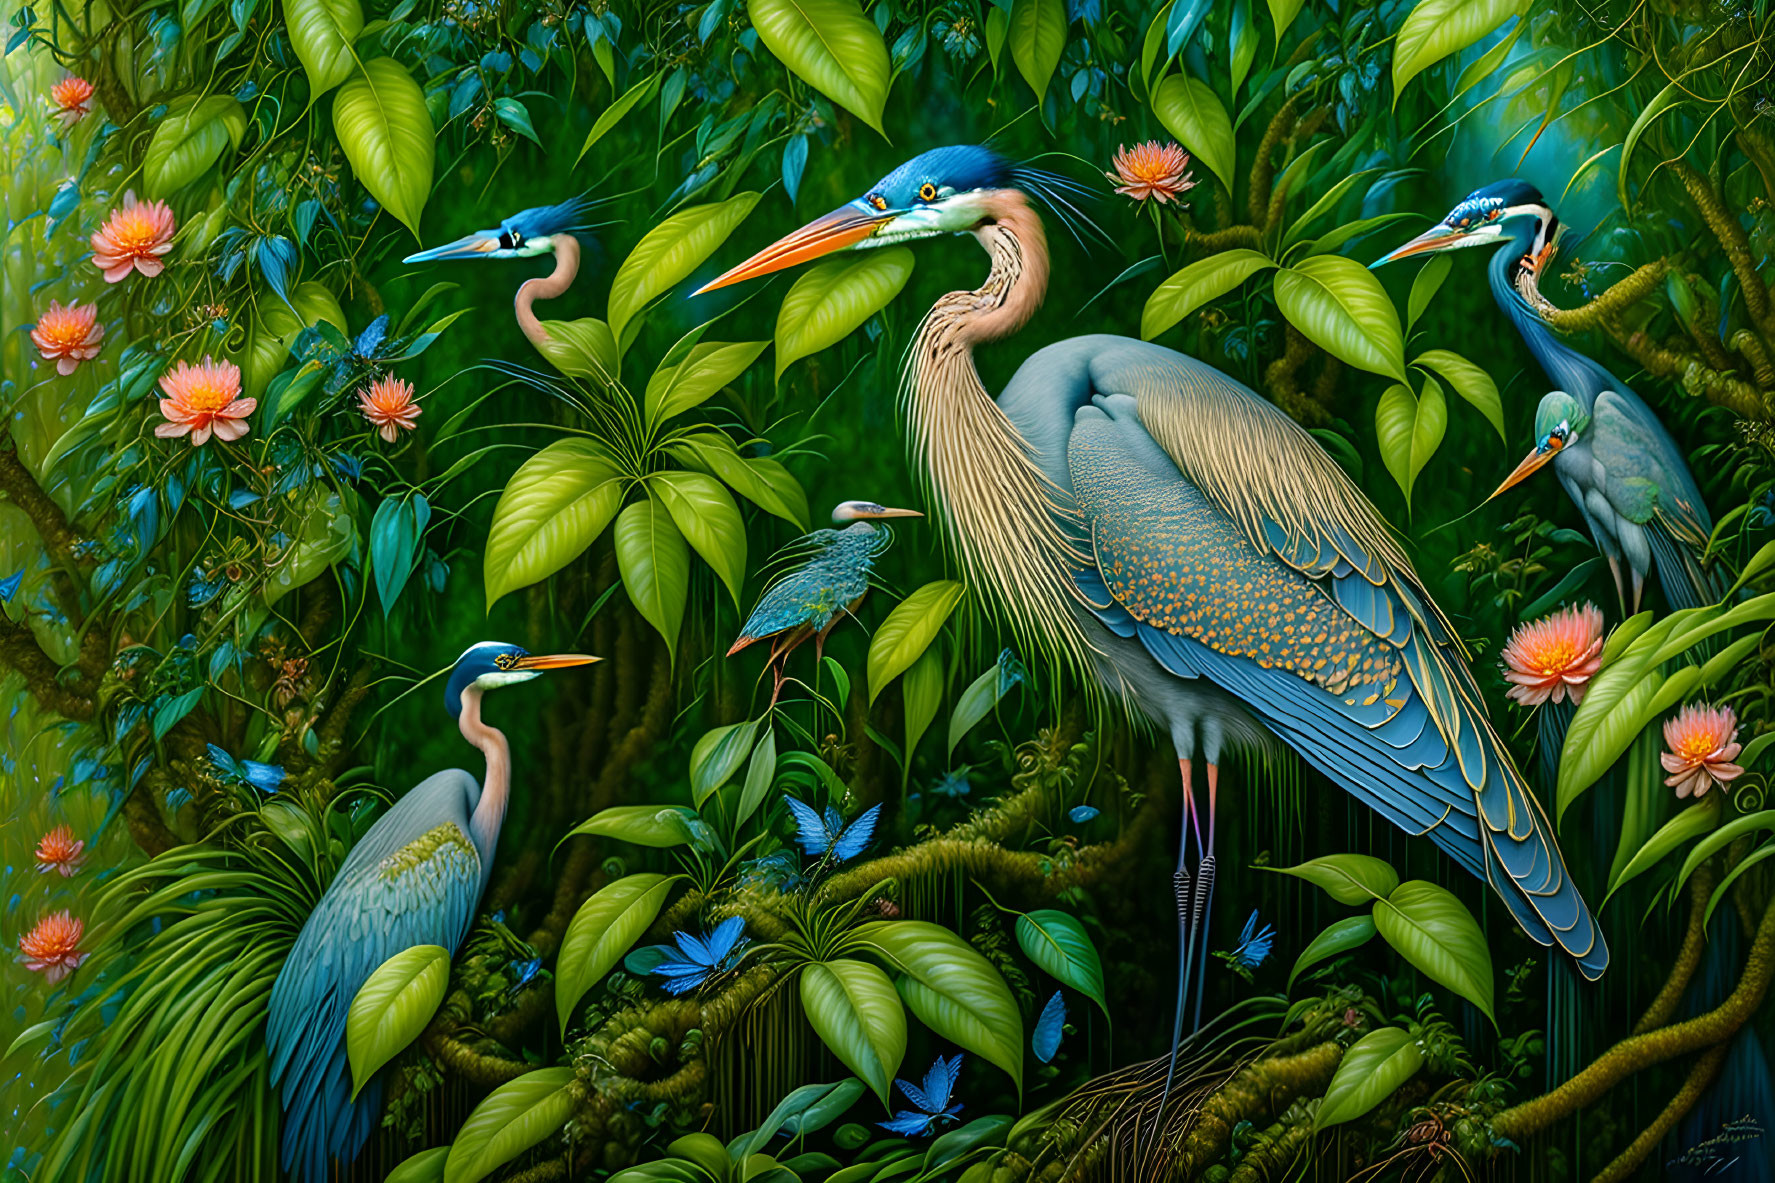 Detailed Herons Painting Among Green Foliage and Pink Flowers